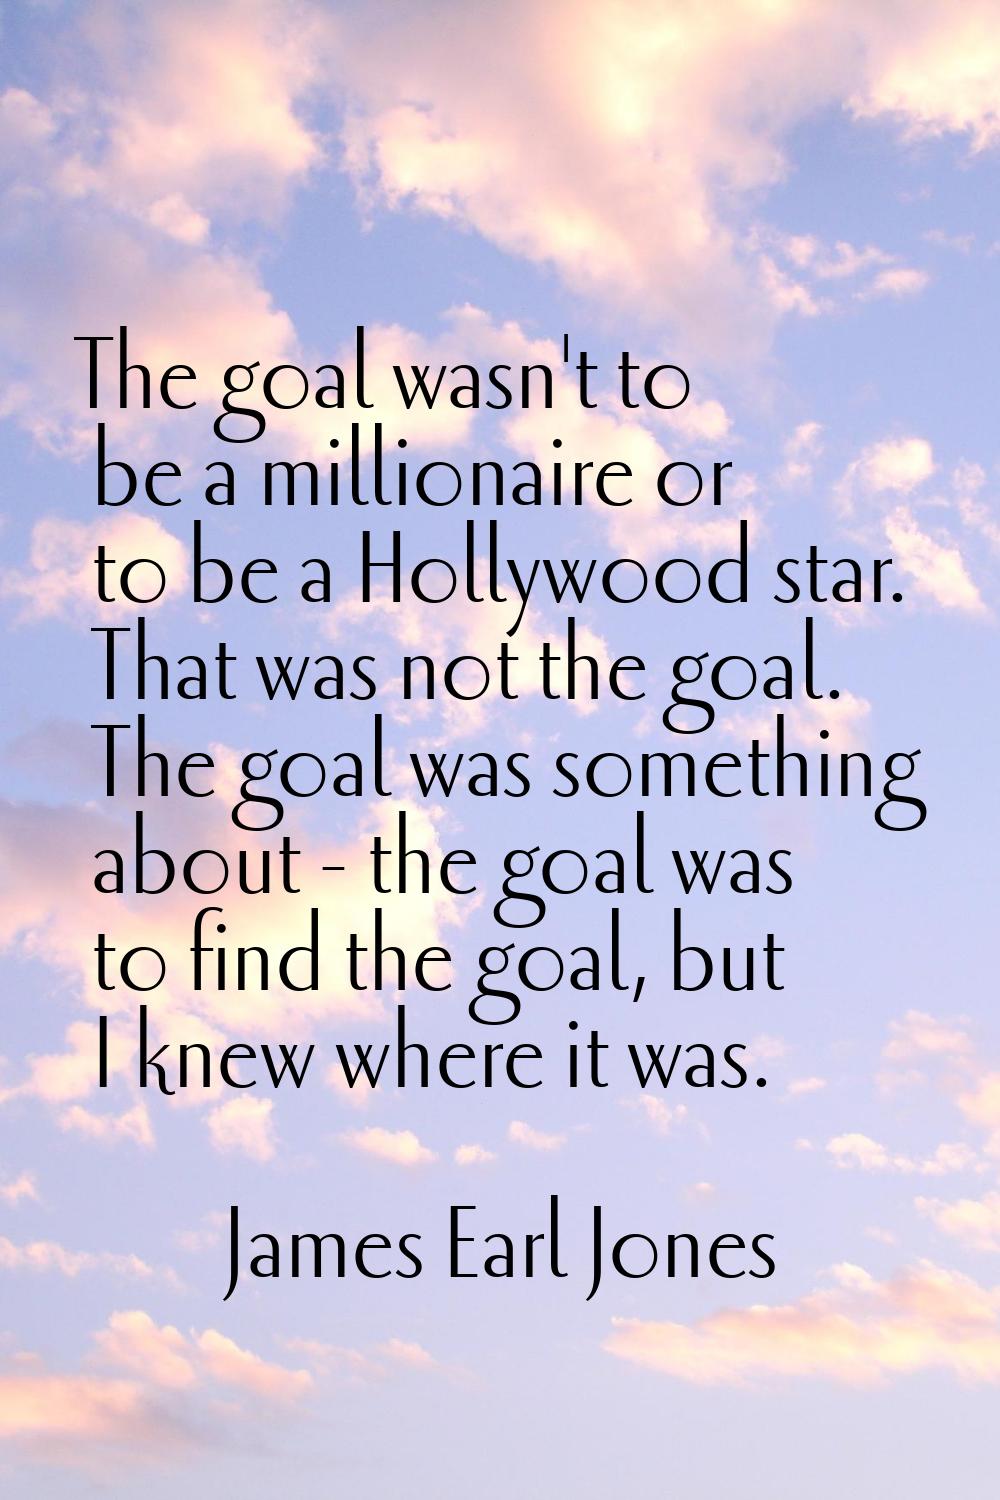 The goal wasn't to be a millionaire or to be a Hollywood star. That was not the goal. The goal was 